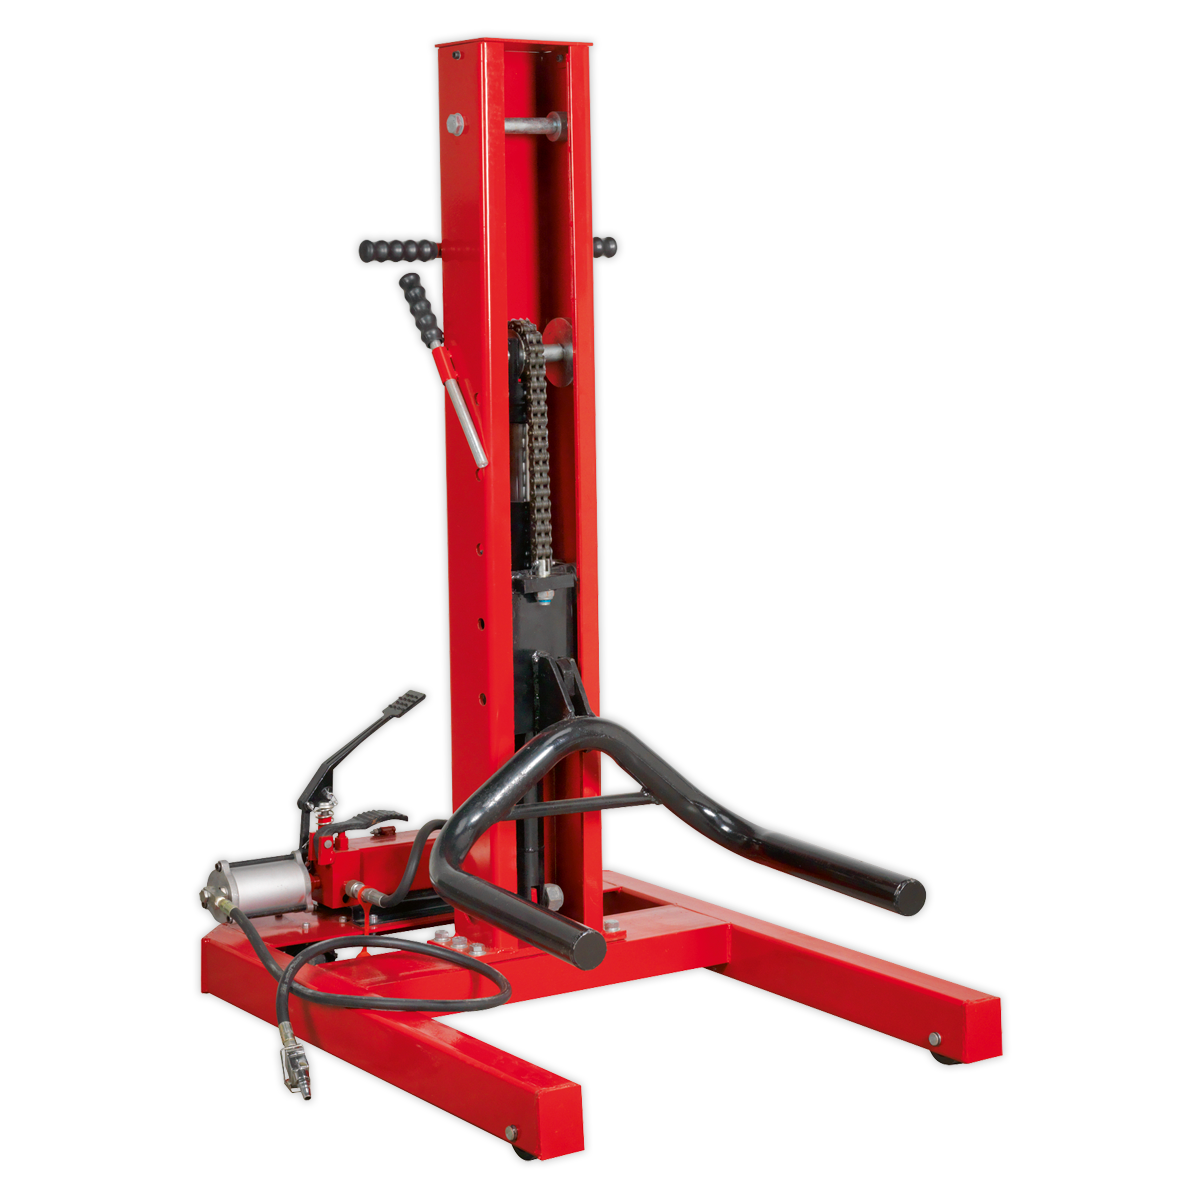 Vehicle Lift 1.5 Tonne Air/Hydraulic with Foot Pedal - AVR1500FP - Farming Parts